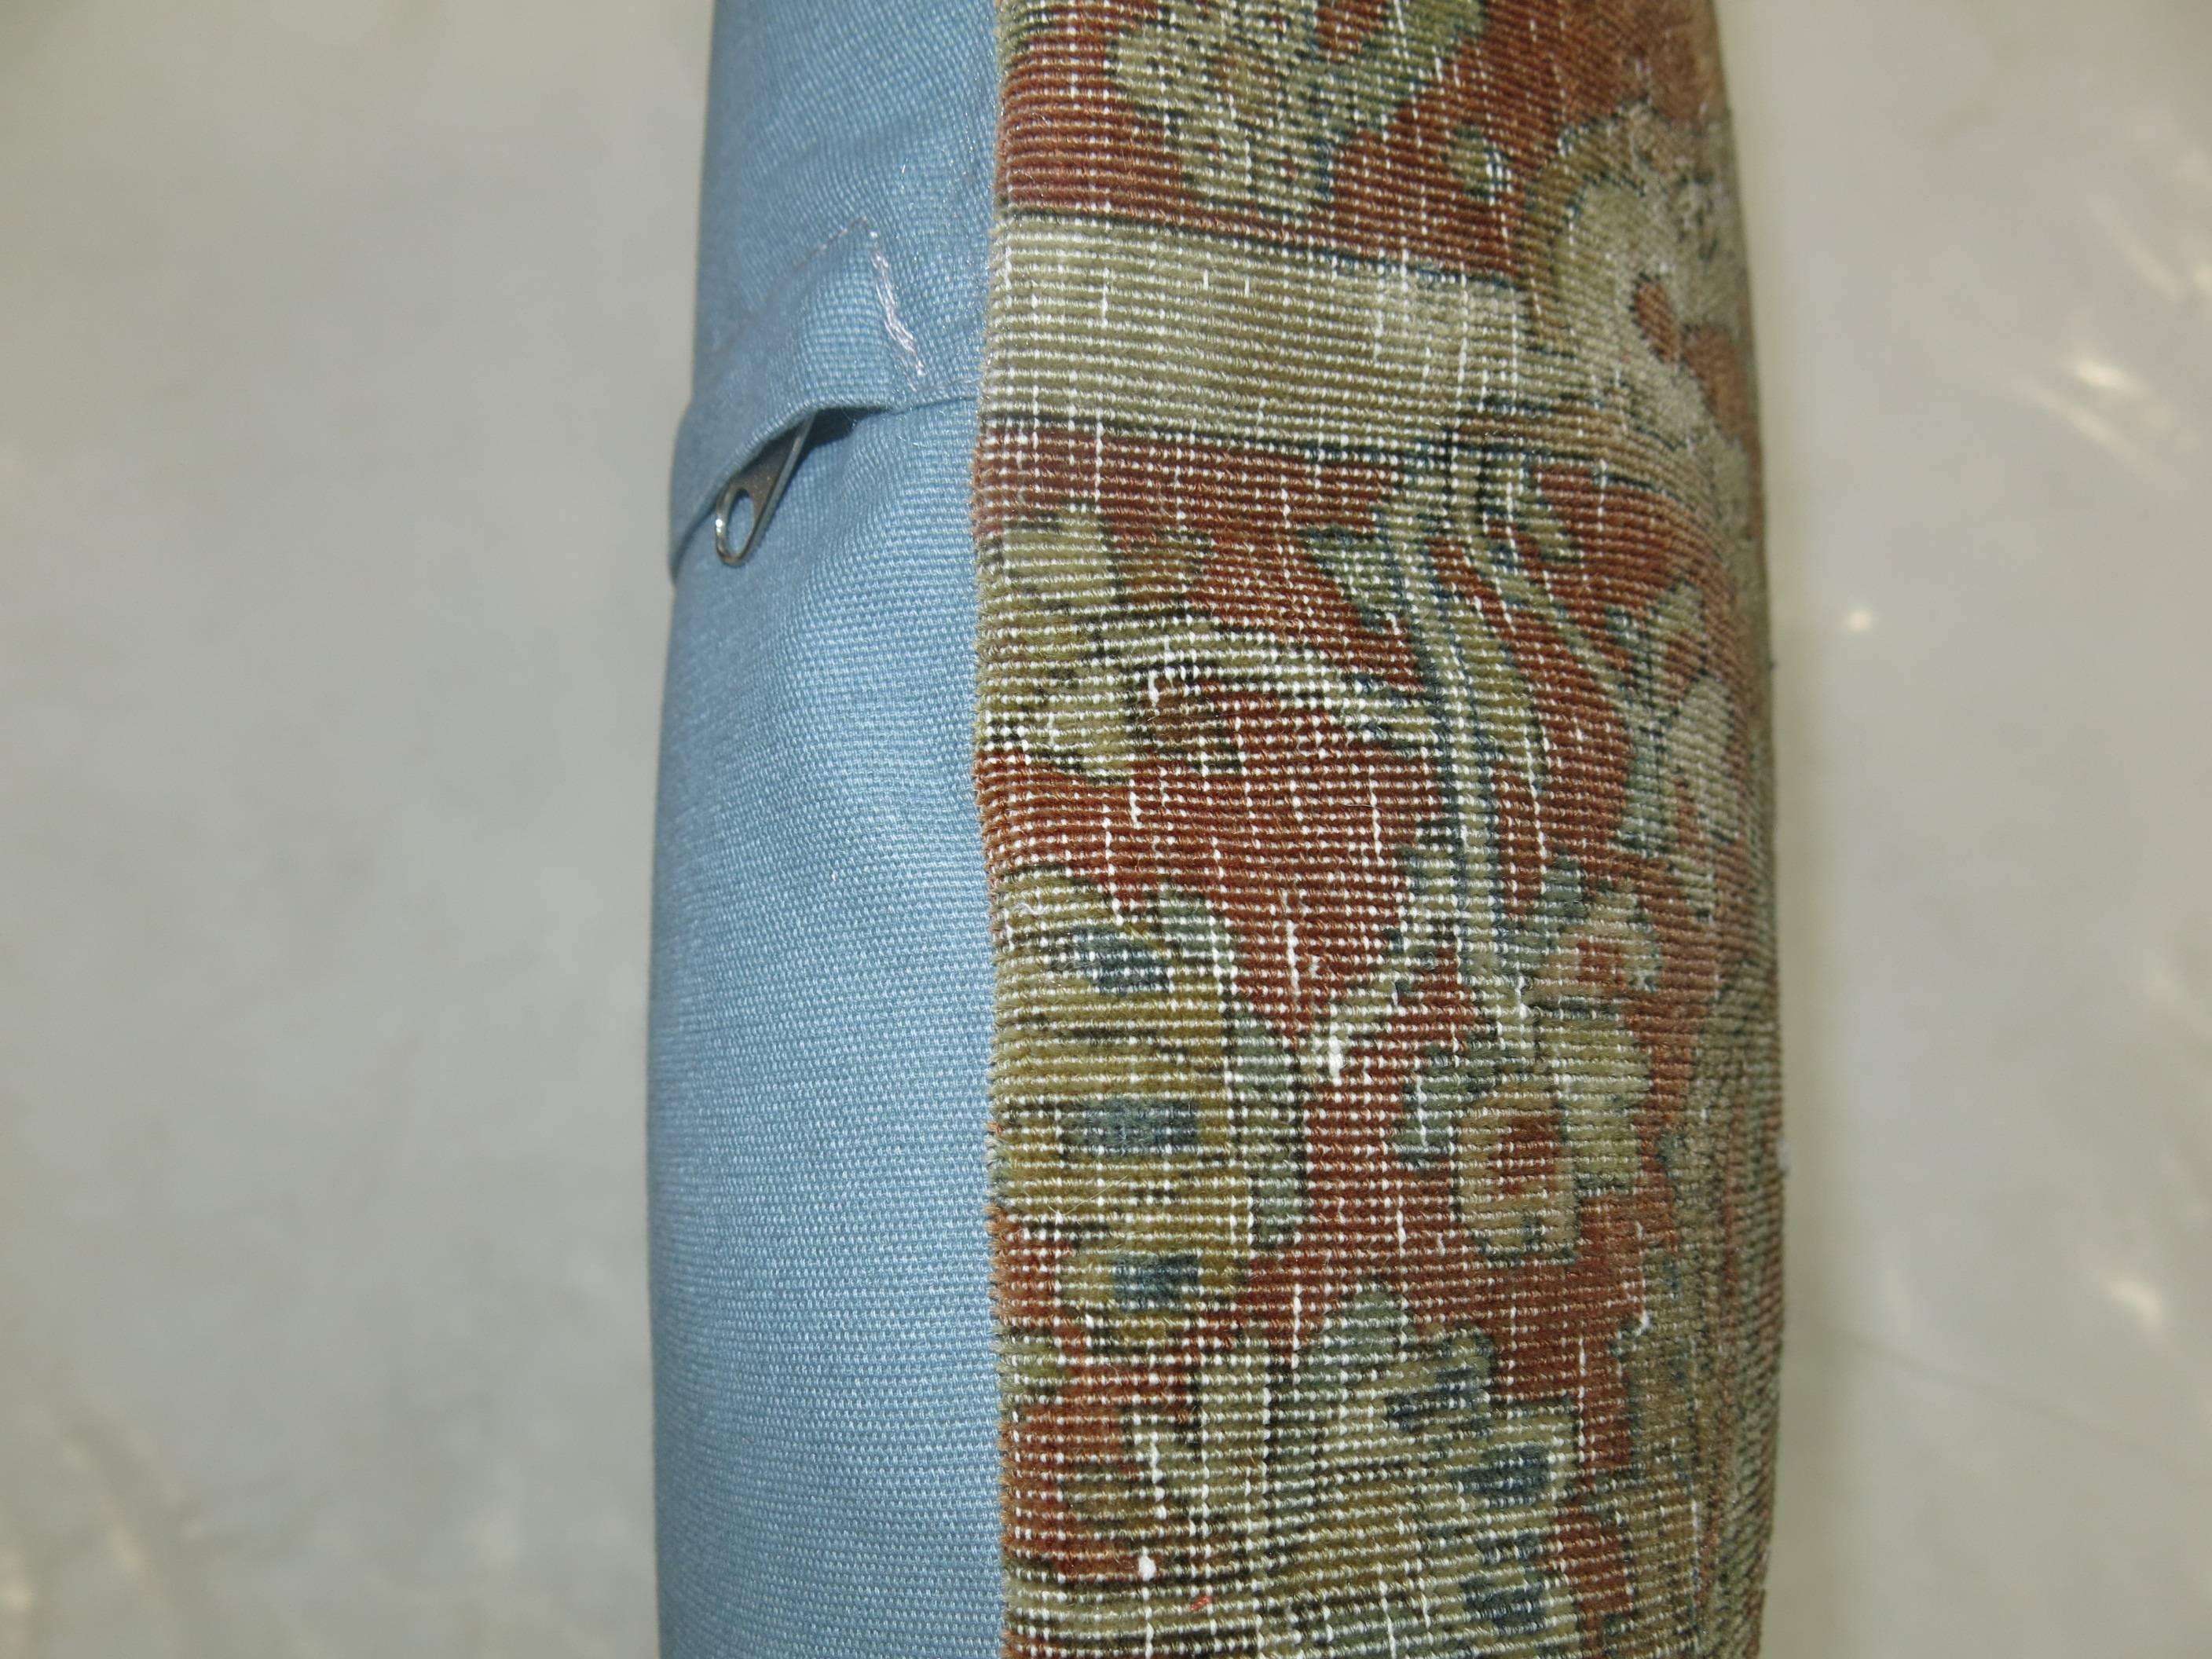 Pillow made from a shabby chic antique Persian rug.

19'' x 20''